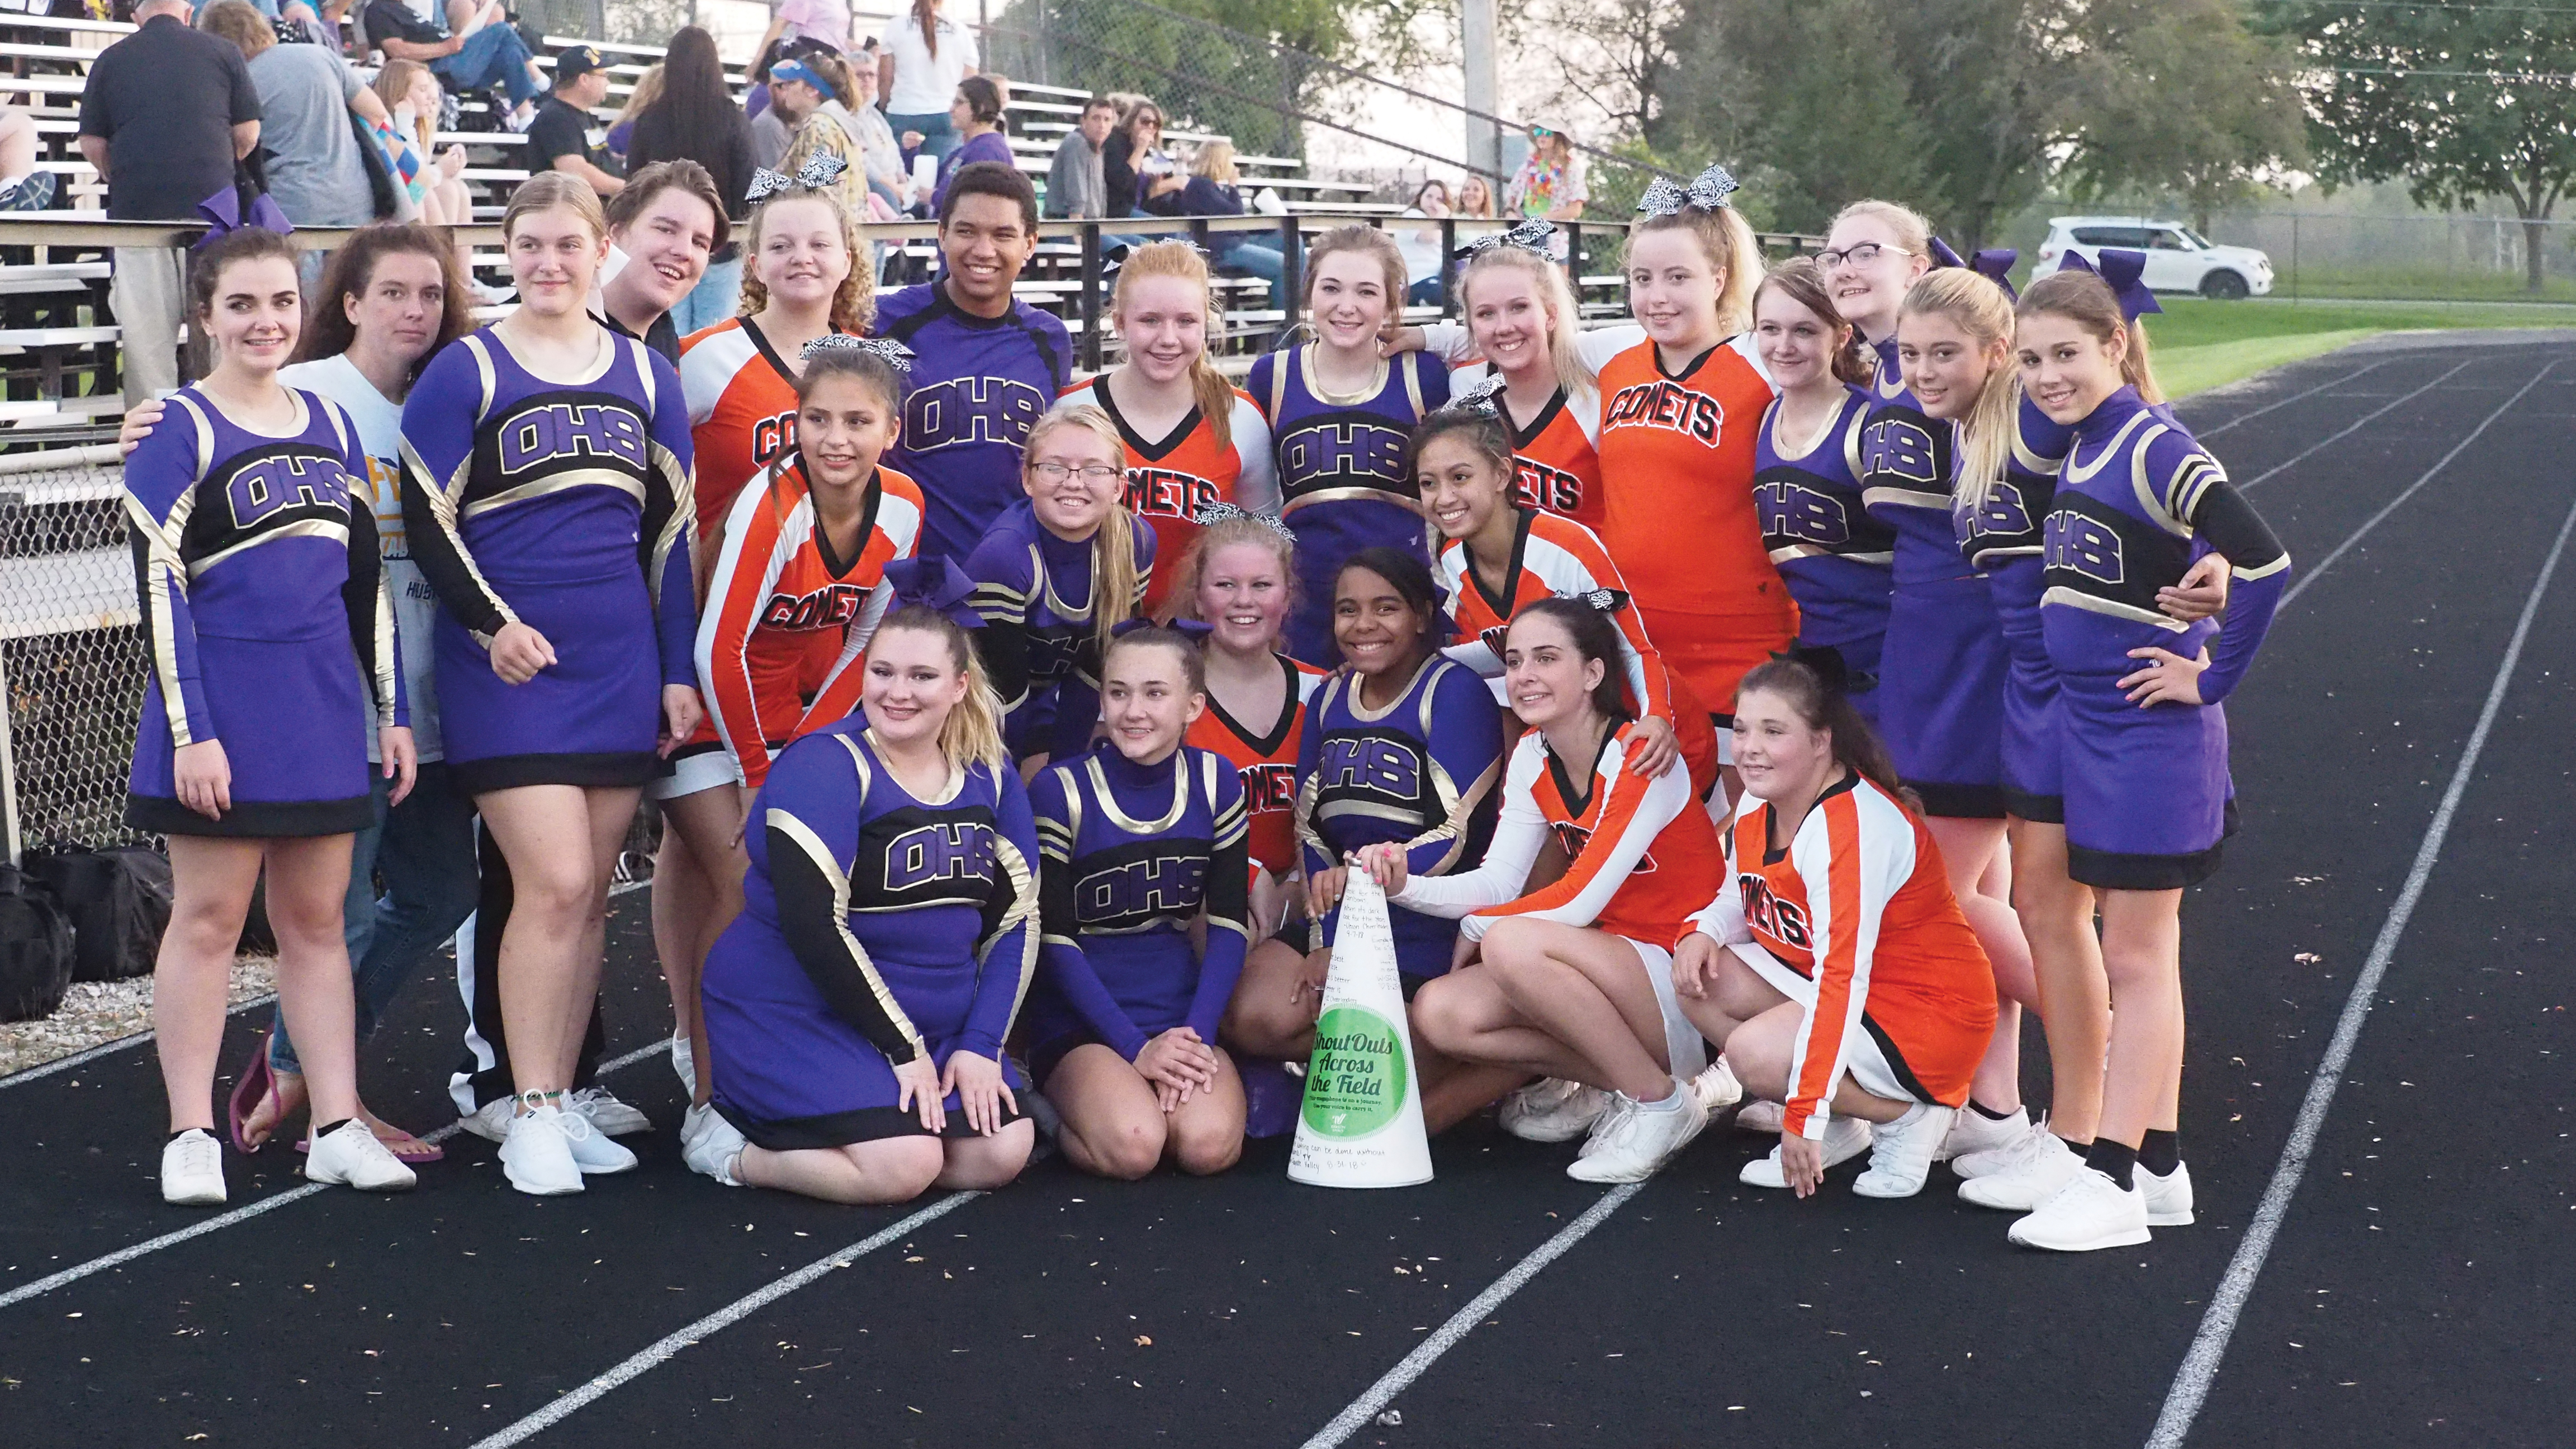 Comet cheerleaders ‘shout out’ across the field